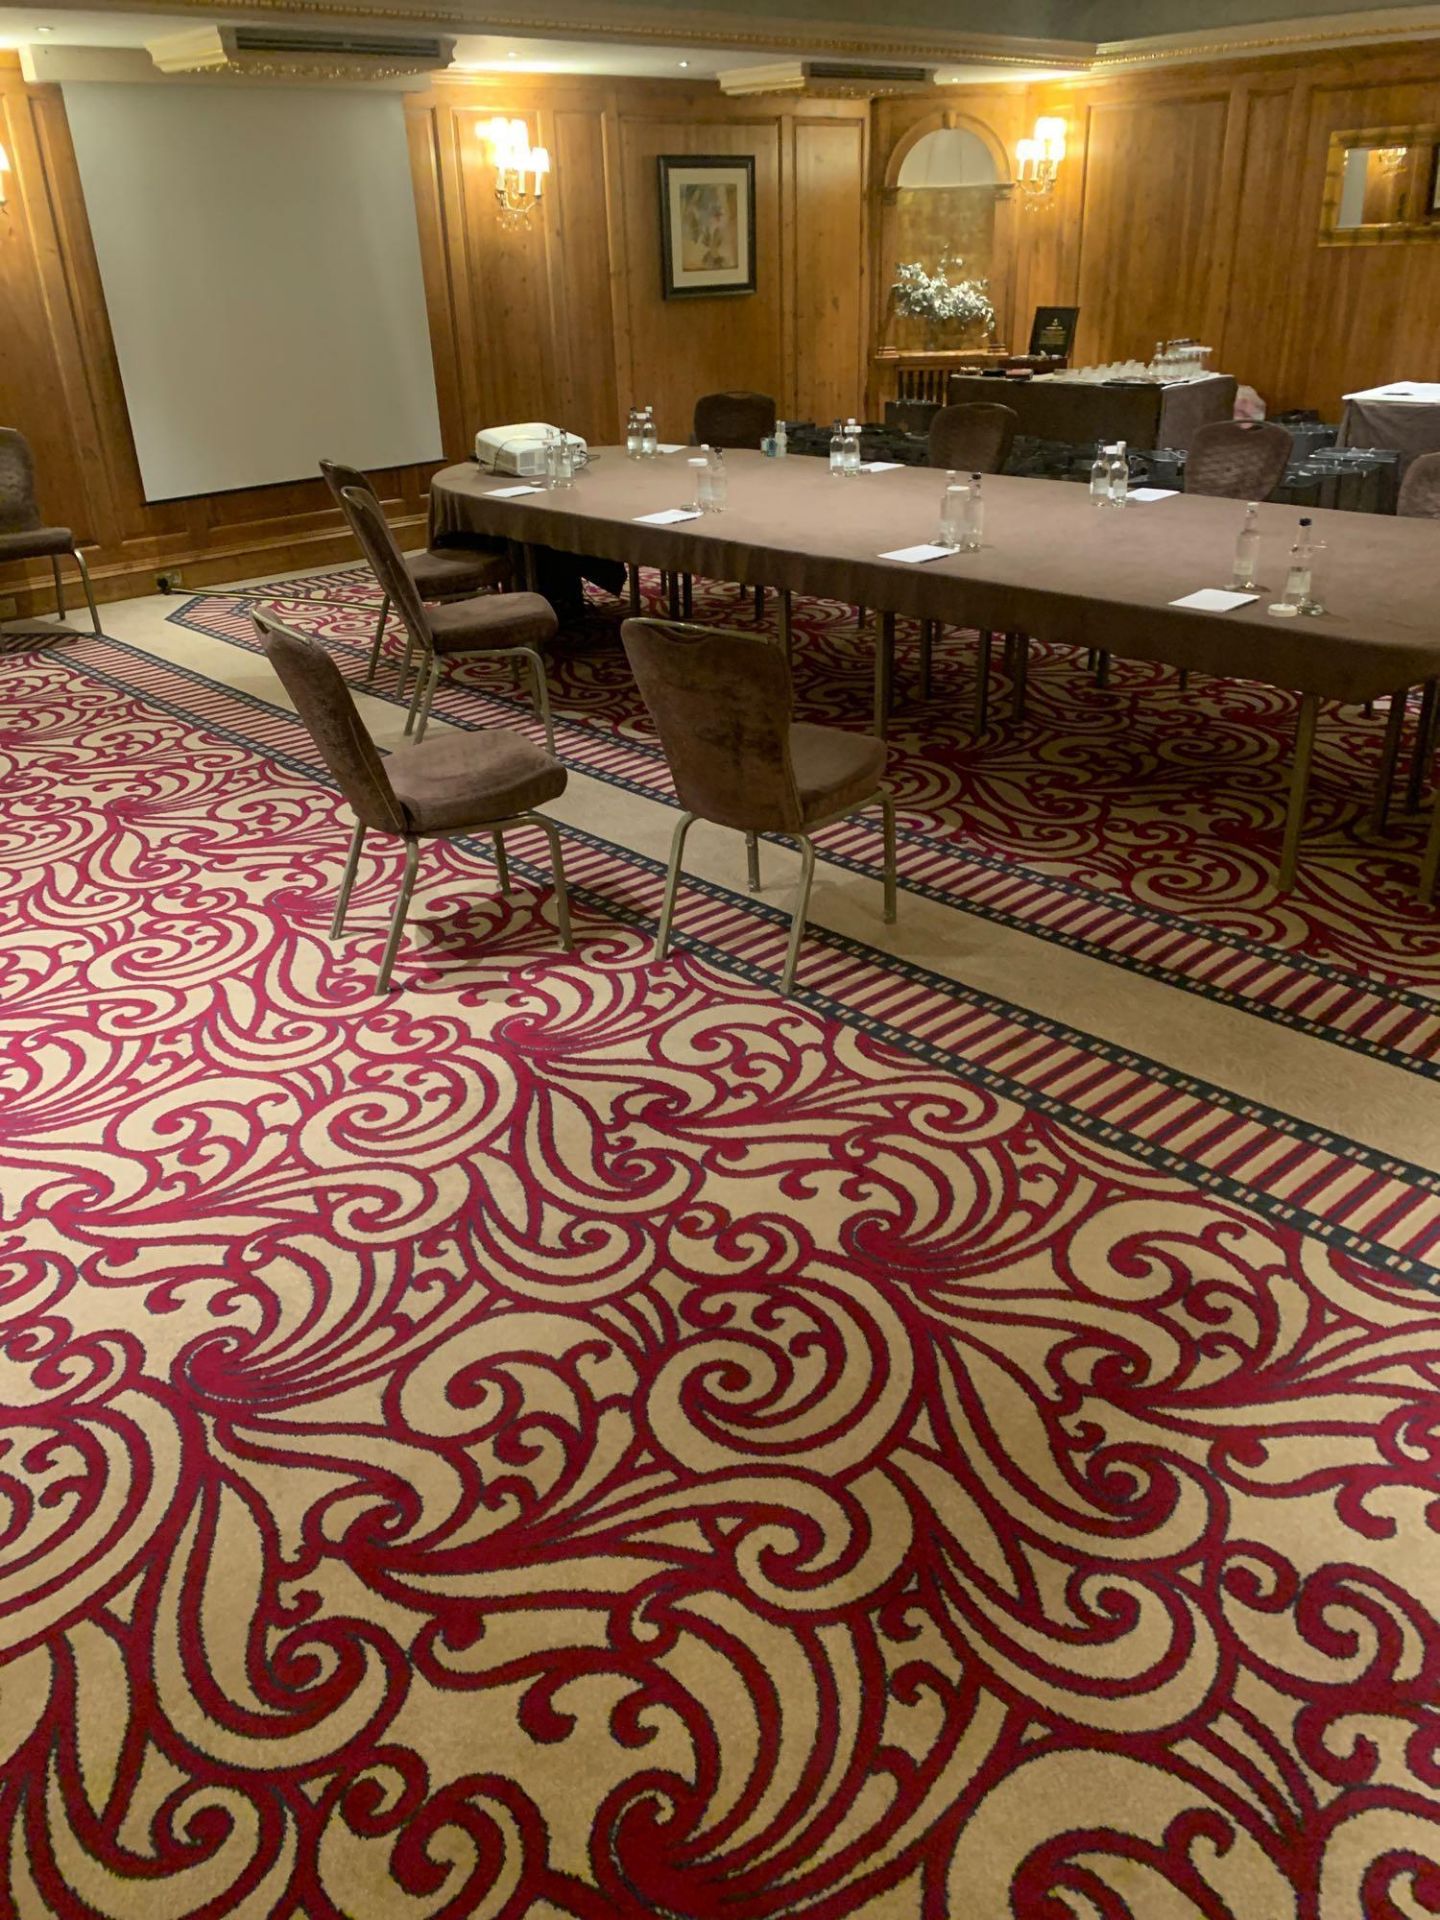 Bespoke Wood Carpet Approximately 12mx 15m Beige Field Carpet With Red Bold Medallions With A